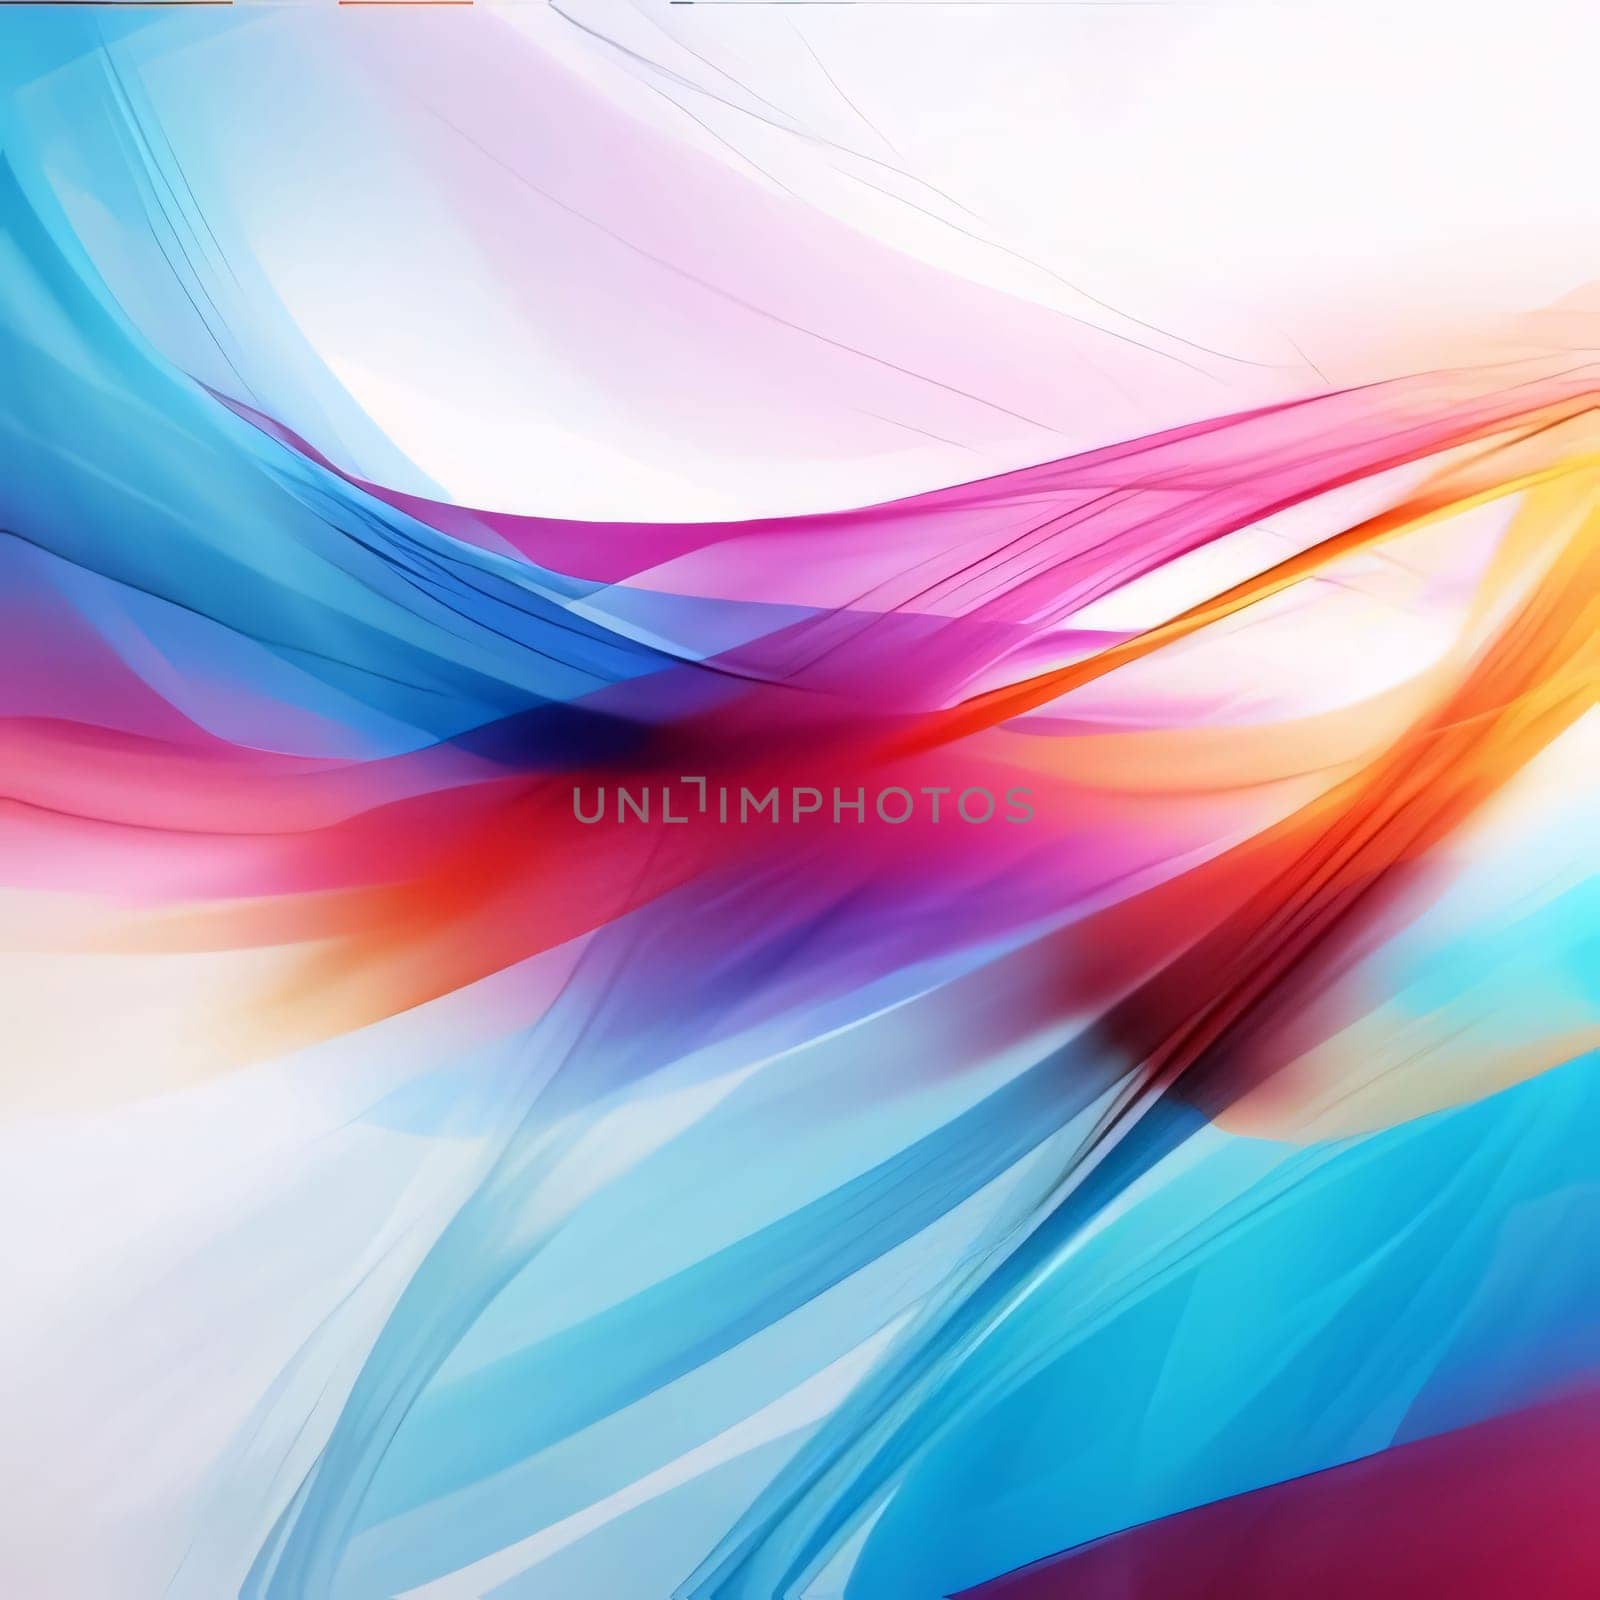 Abstract background design: abstract background with smooth lines in blue, red and yellow colors